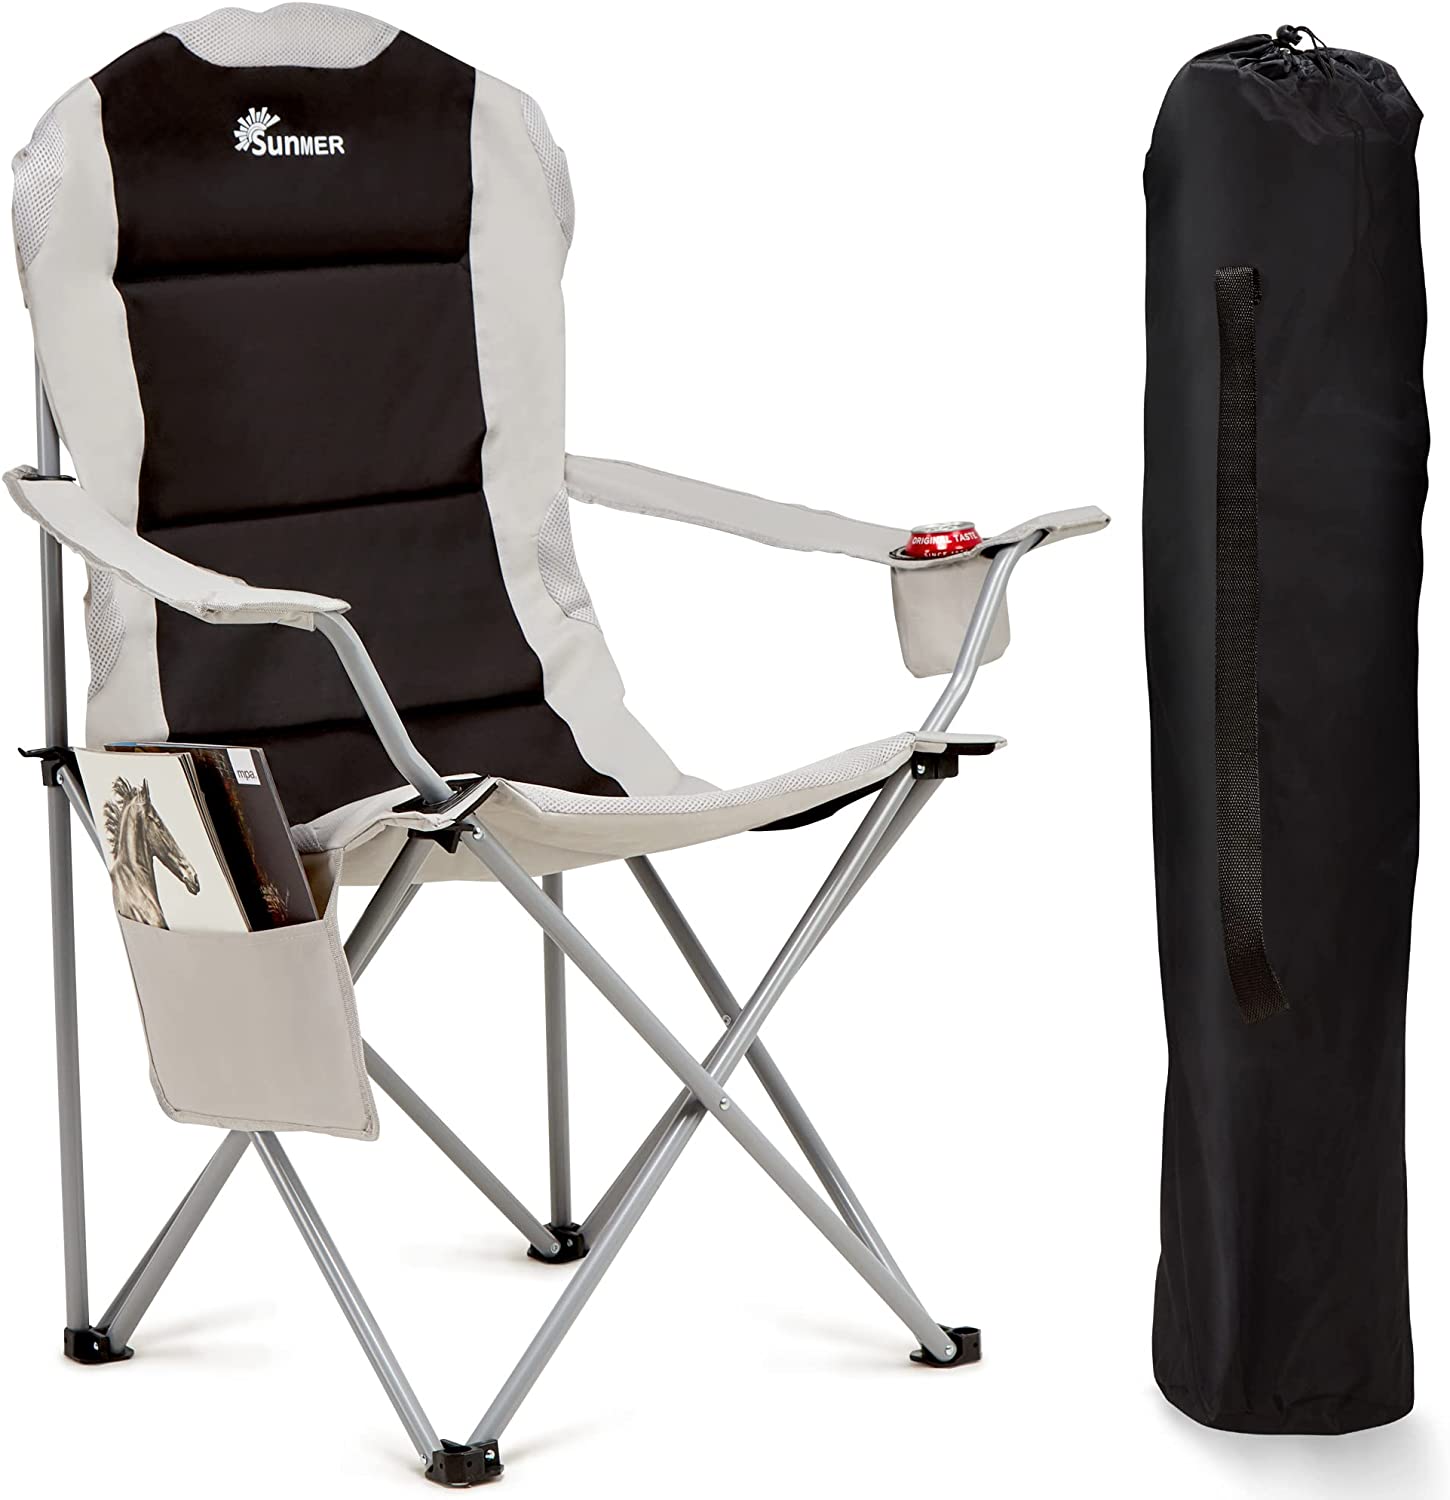 SUNMER Padded Camping Chair Folding Chair with Cup Holder